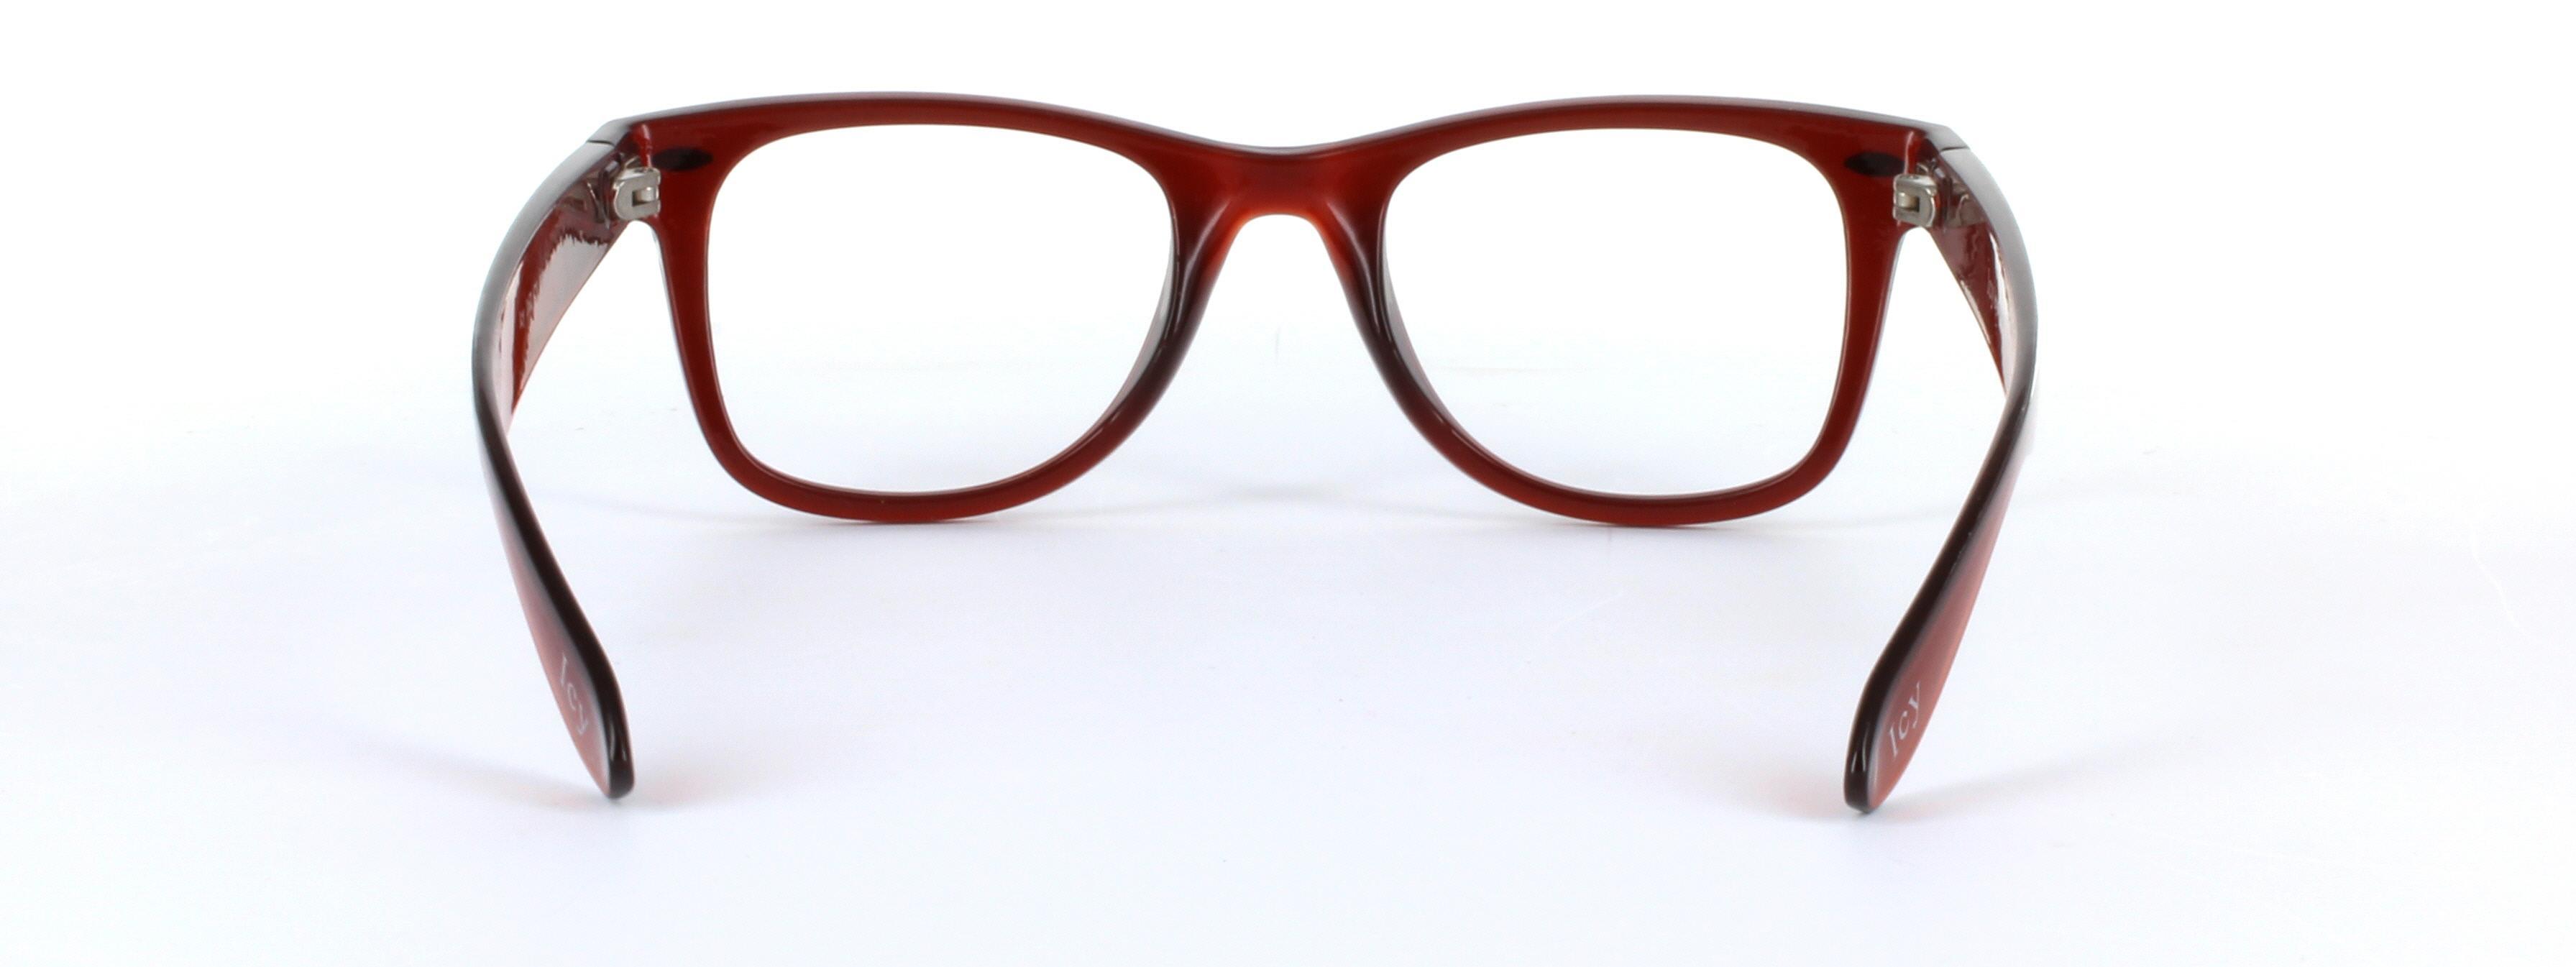 England Brown Full Rim Oval Plastic Glasses - Image View 3